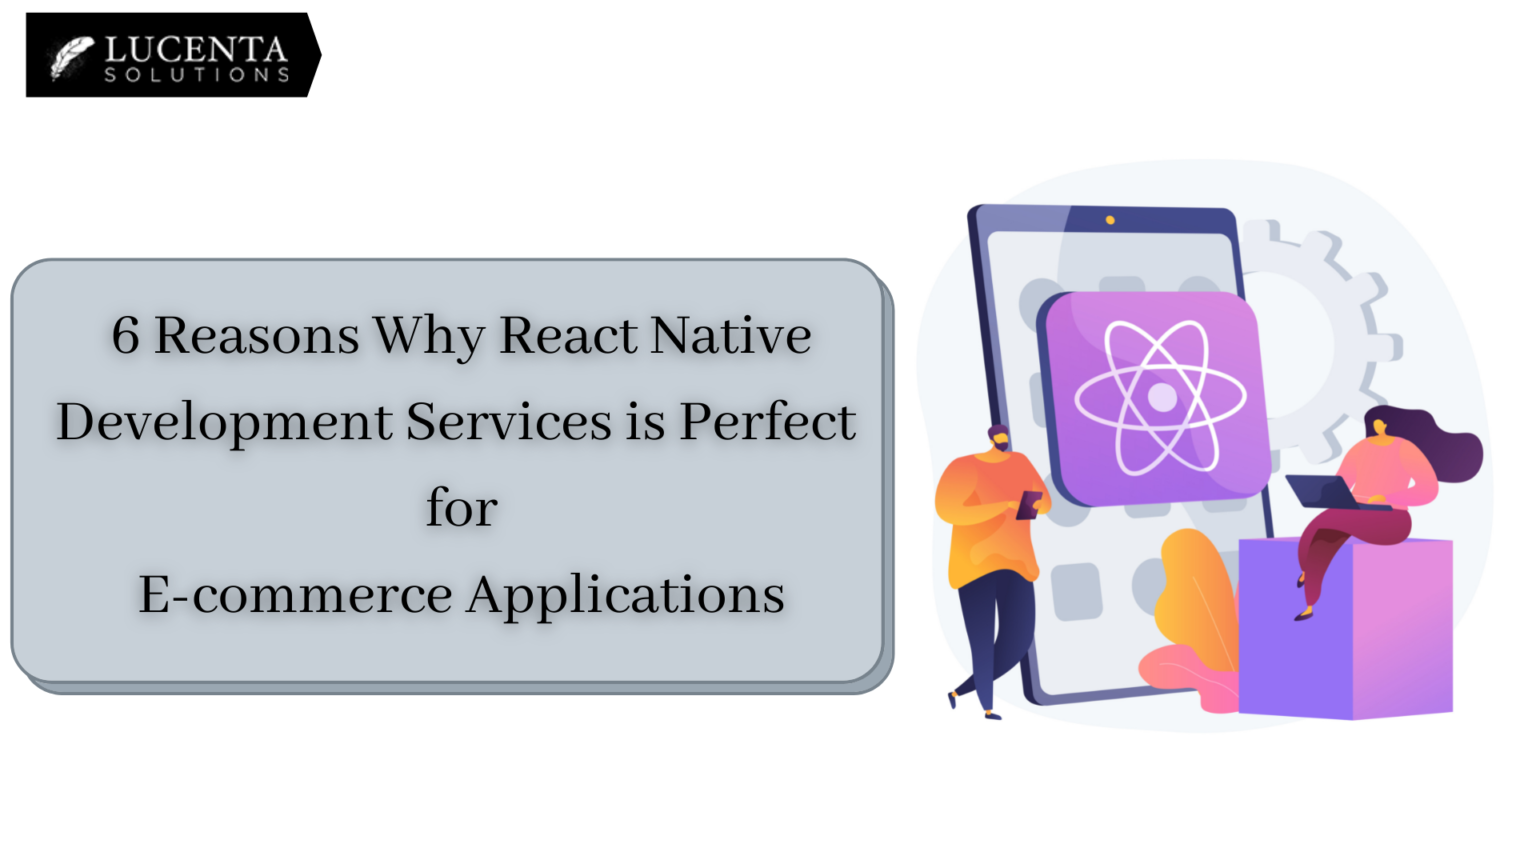 Reasons Why React Native Development Services is Perfect for E-commerce Applications